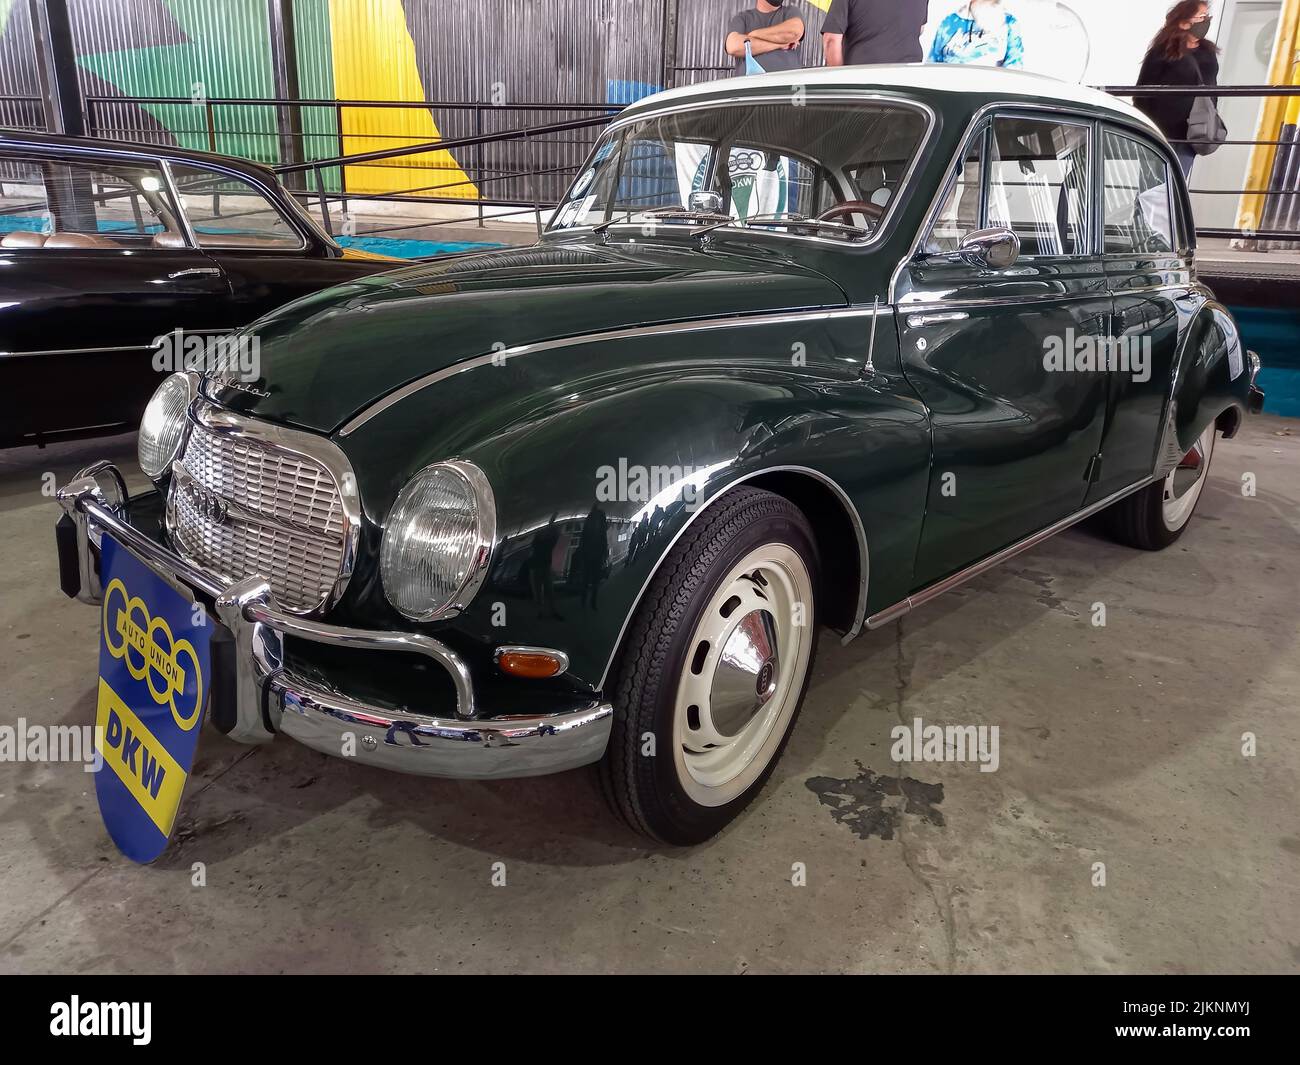 Avellaneda, Argentina - Apr 3, 2022: Old black Auto Union DKW 1000 S four door saloon 1960-1970 parked in a warehouse yard. Classic car show. Stock Photo